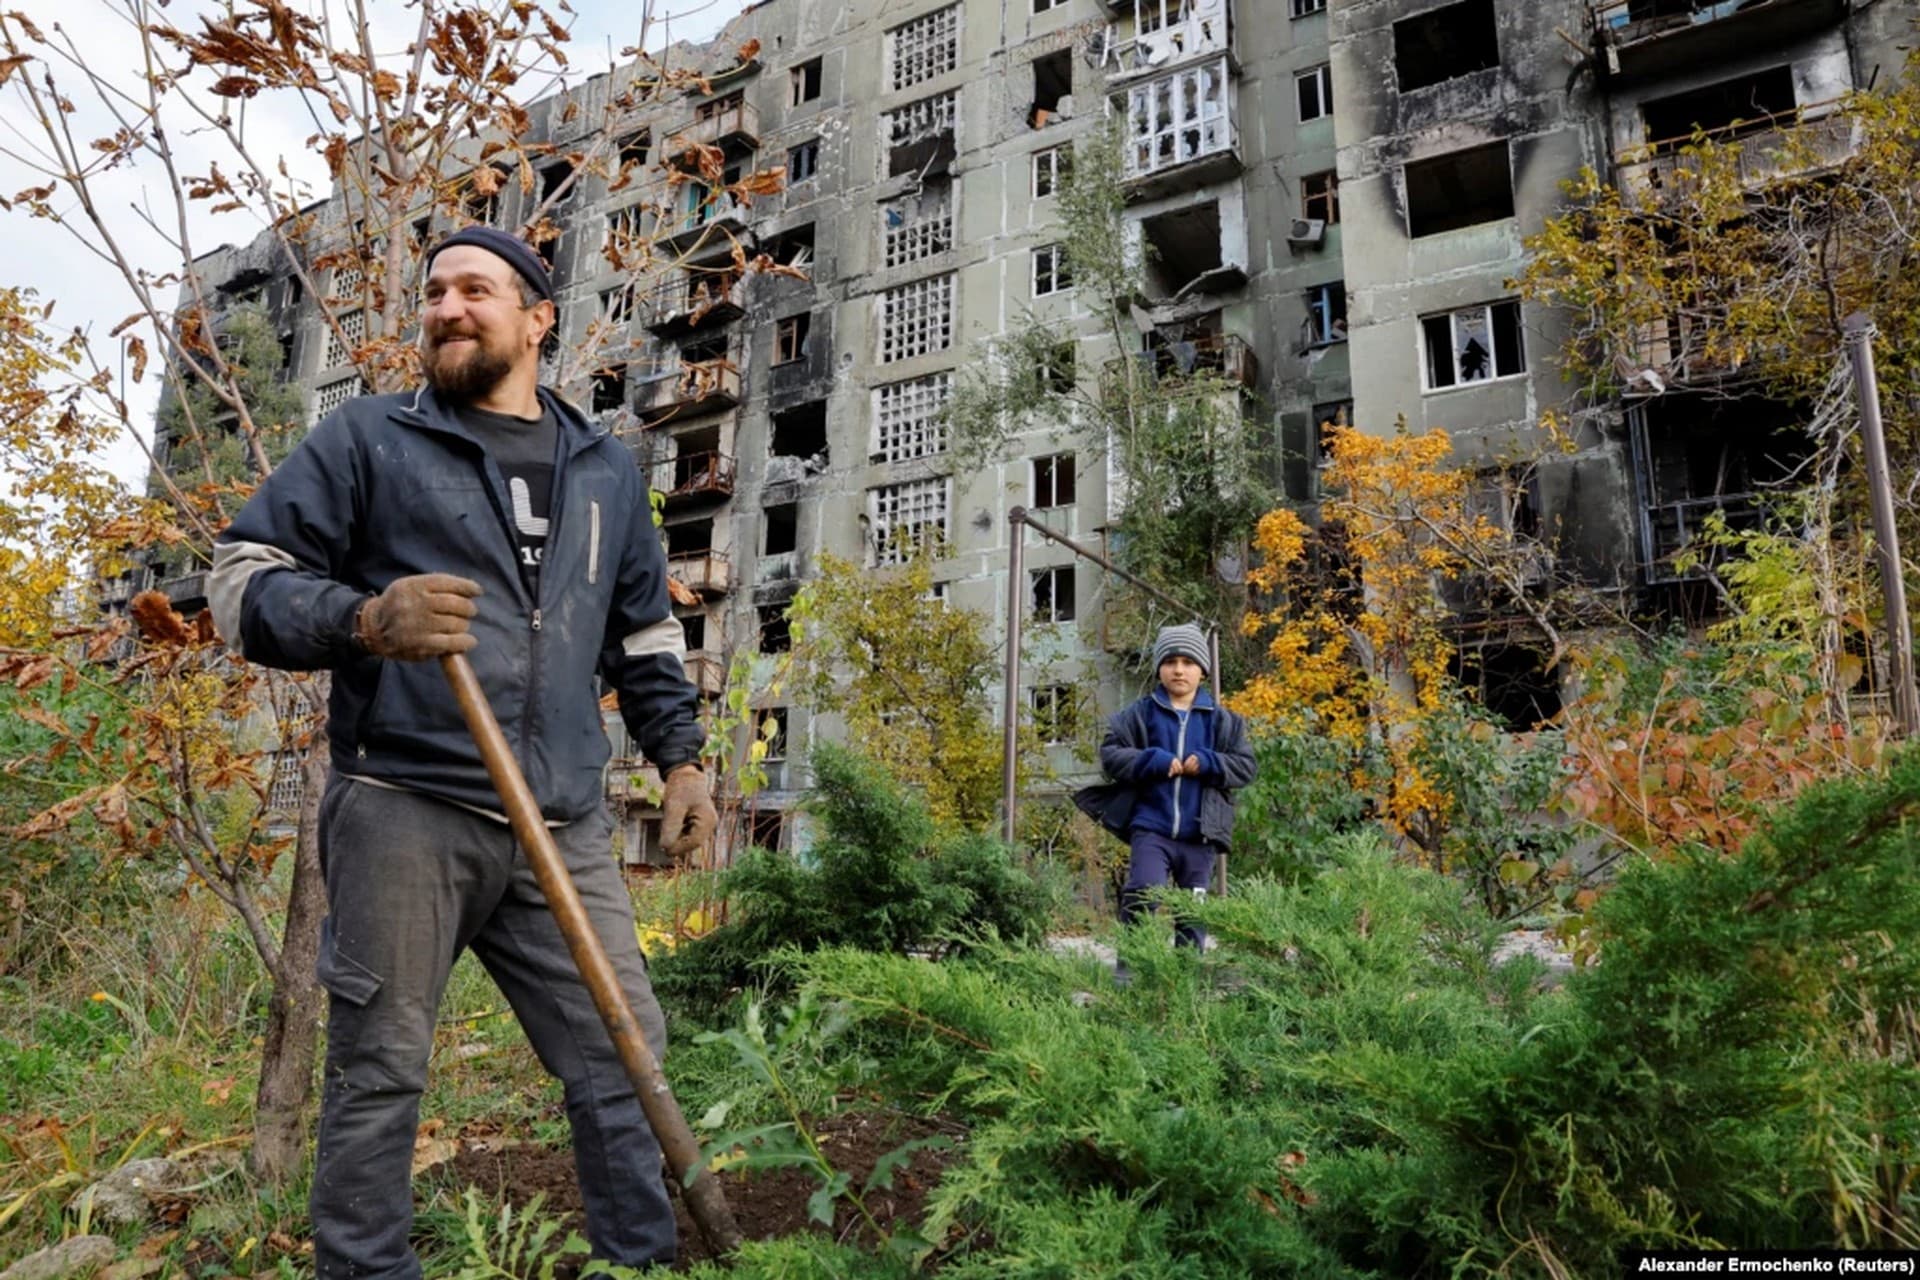 A Mariupol man and his young nephew work in the yard of a damaged building on October 29